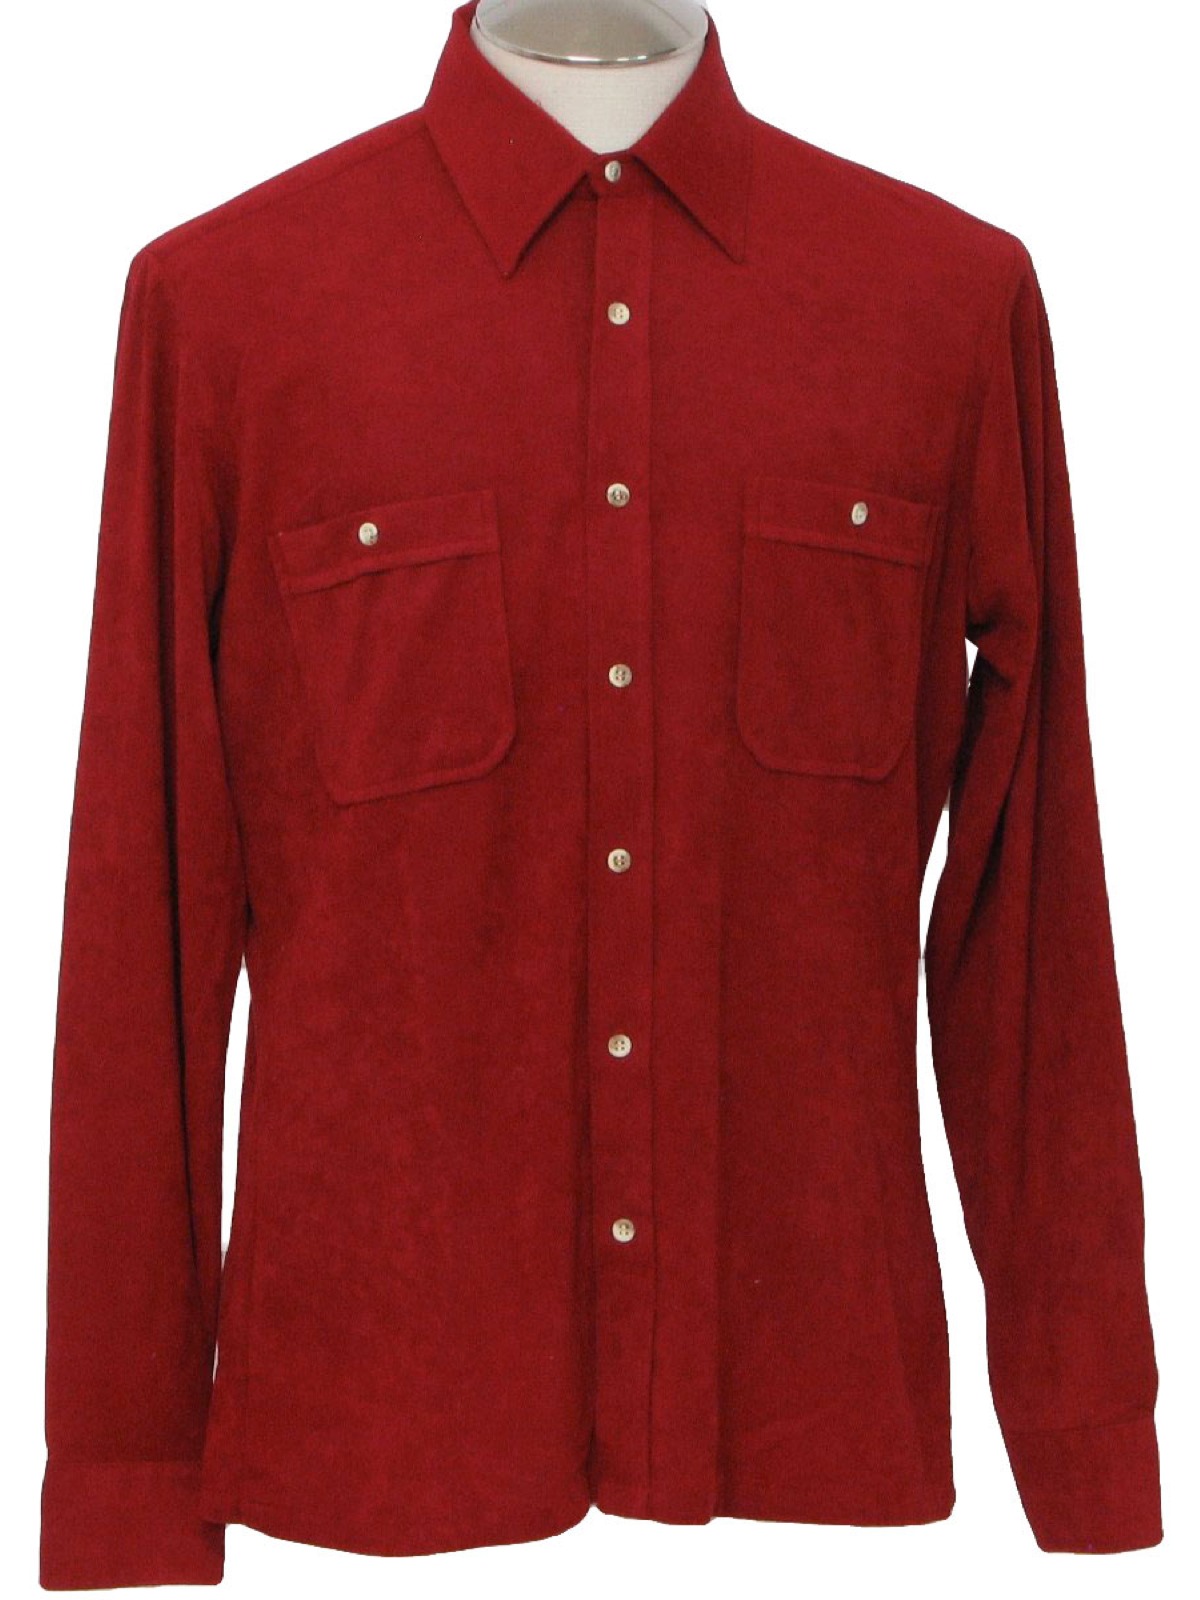 solid red button down shirt with blue buttons